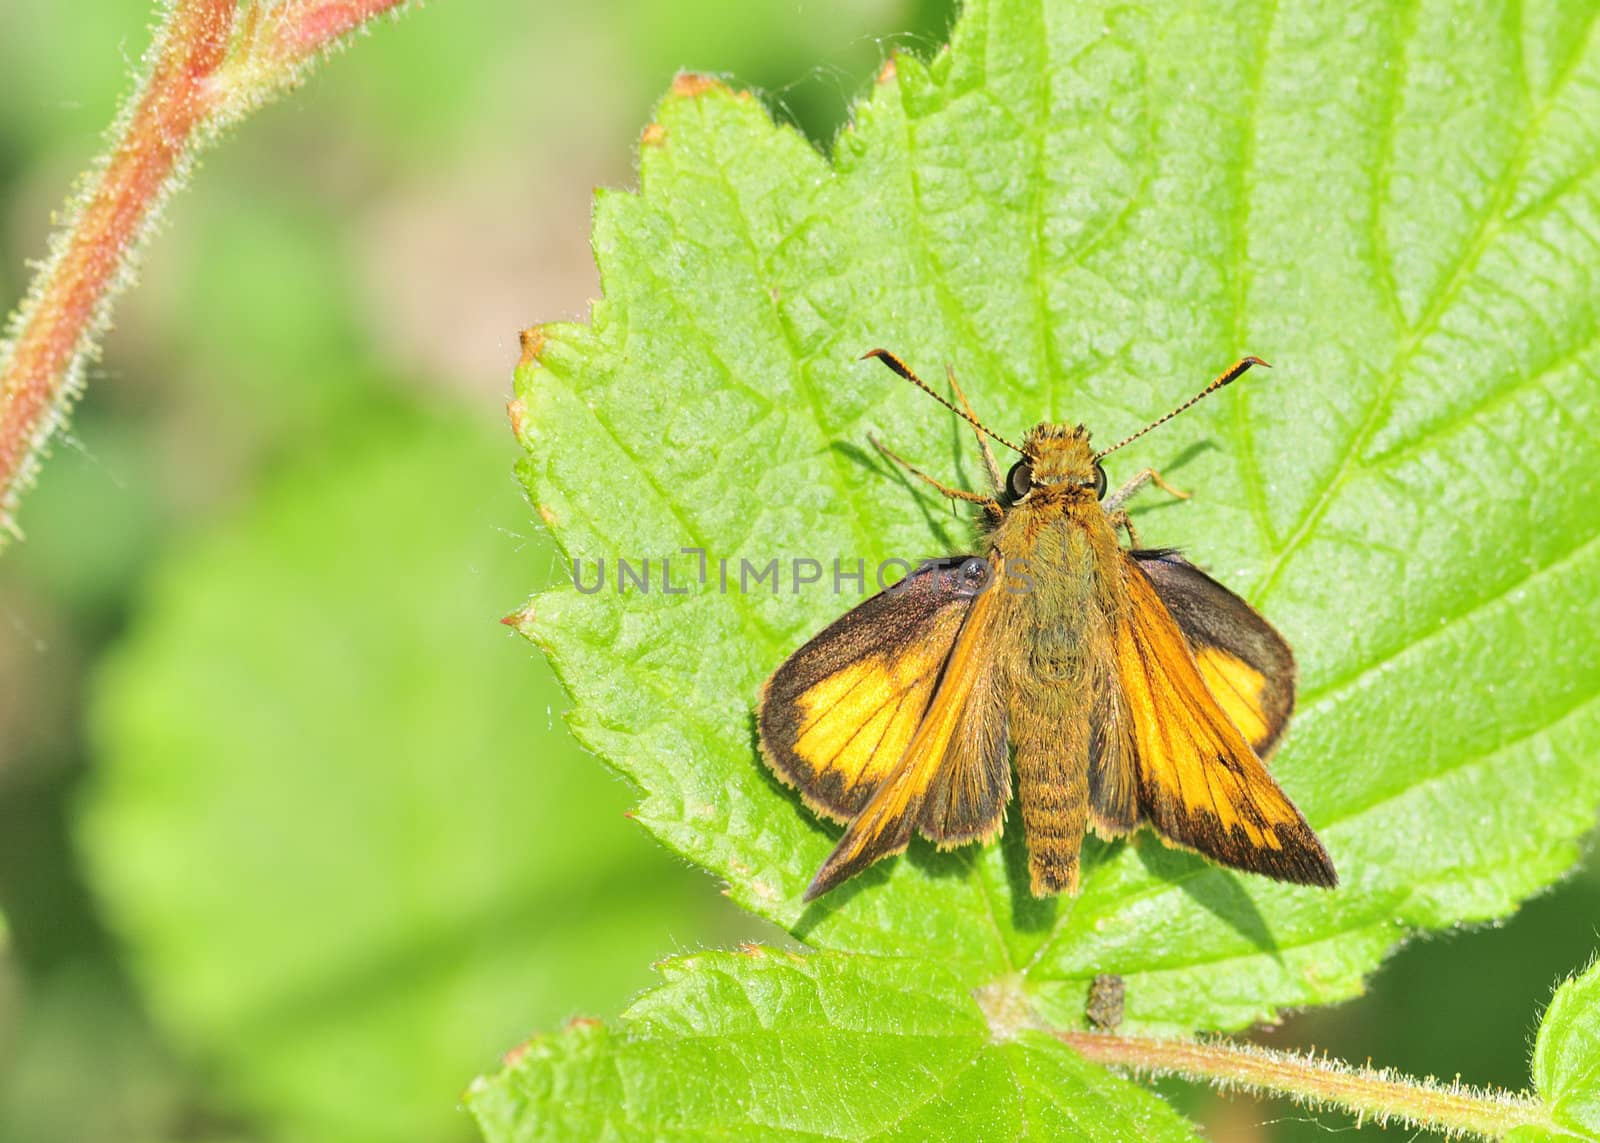 A skipper butterfly perched on a plant leaf.